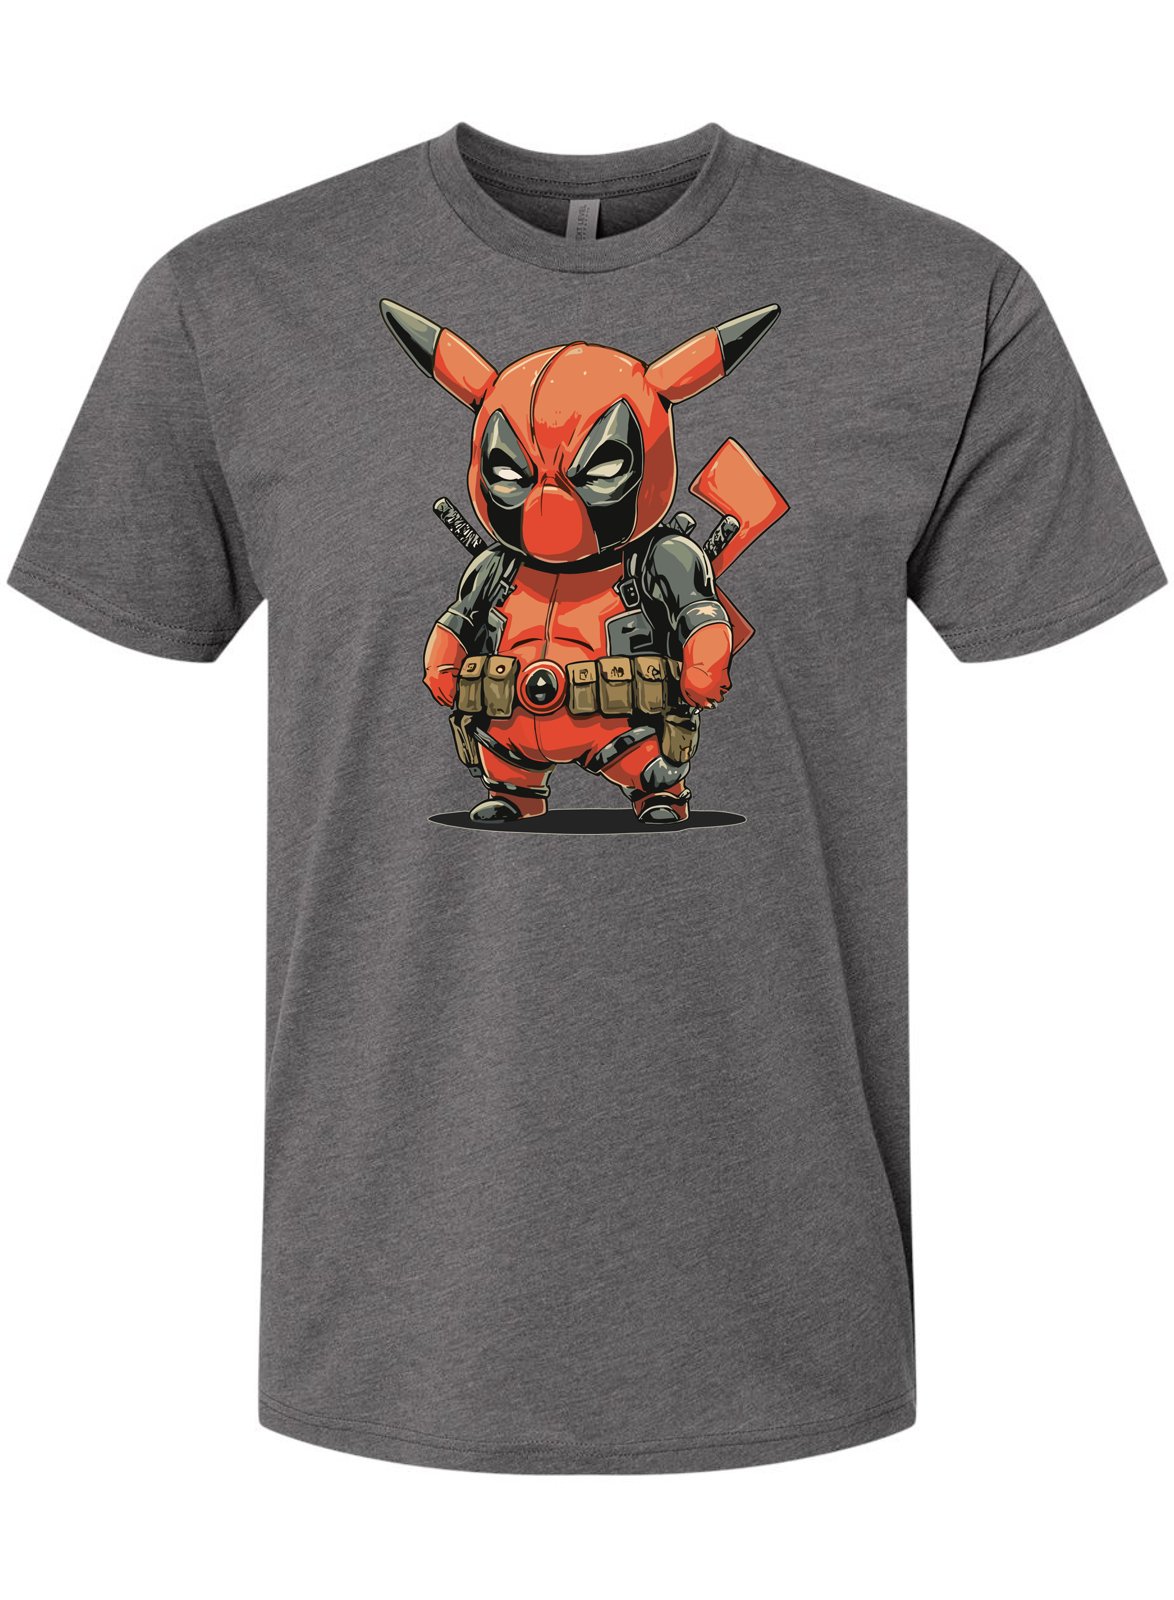 Exclusive: Pikachu inspired Deadpool Tees Now Available! -